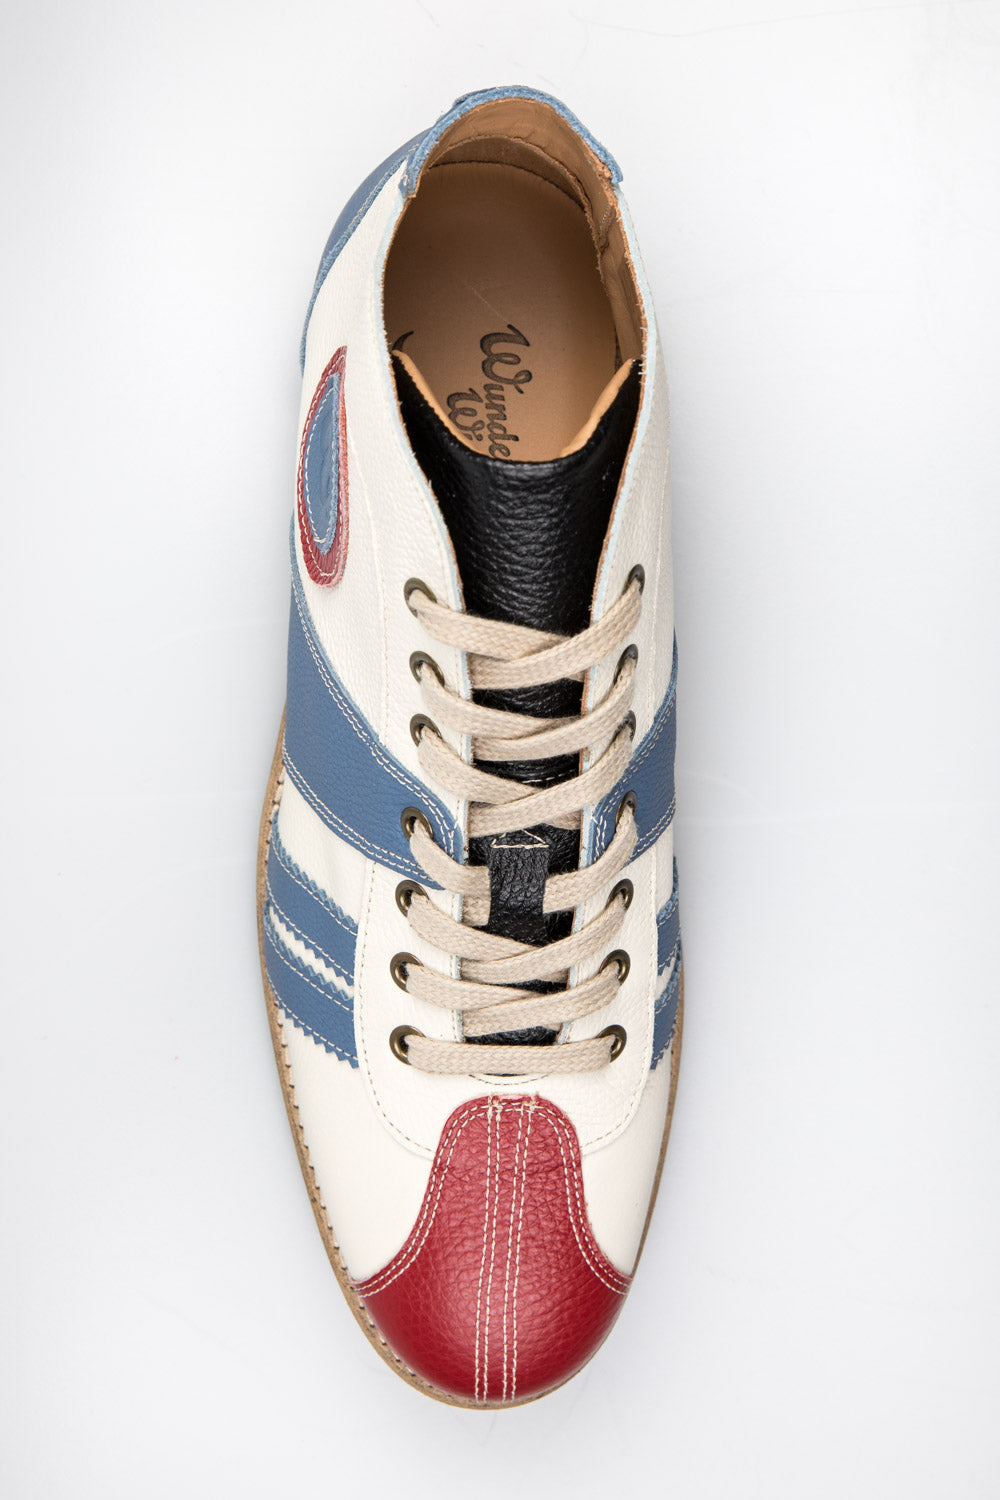 The Racer blue/white/red